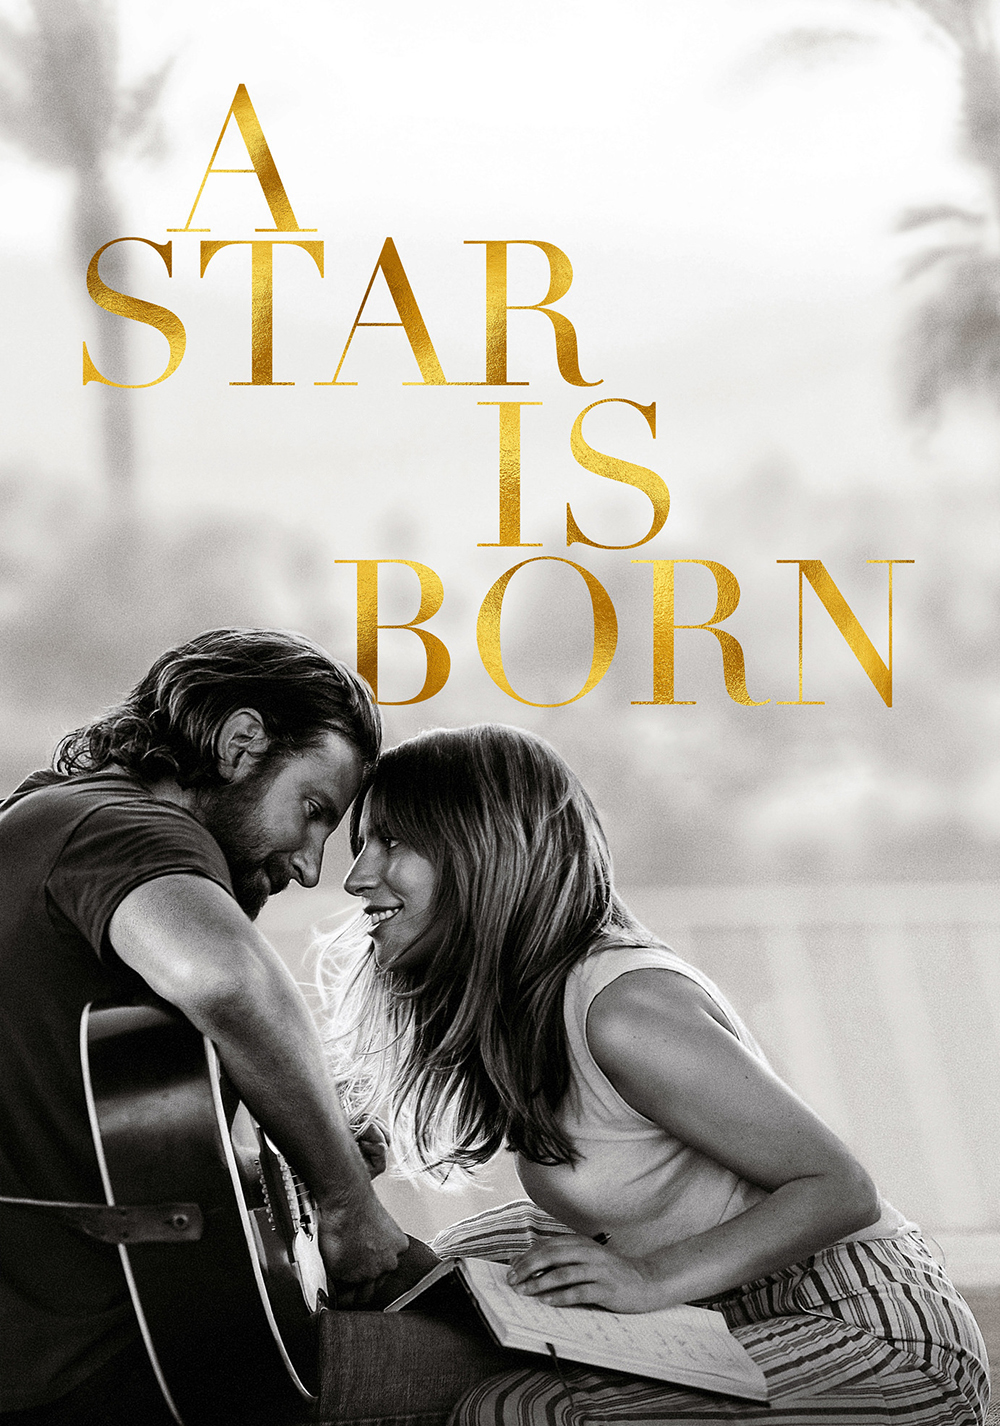 A Star Is Born (2018) ★★★☆☆